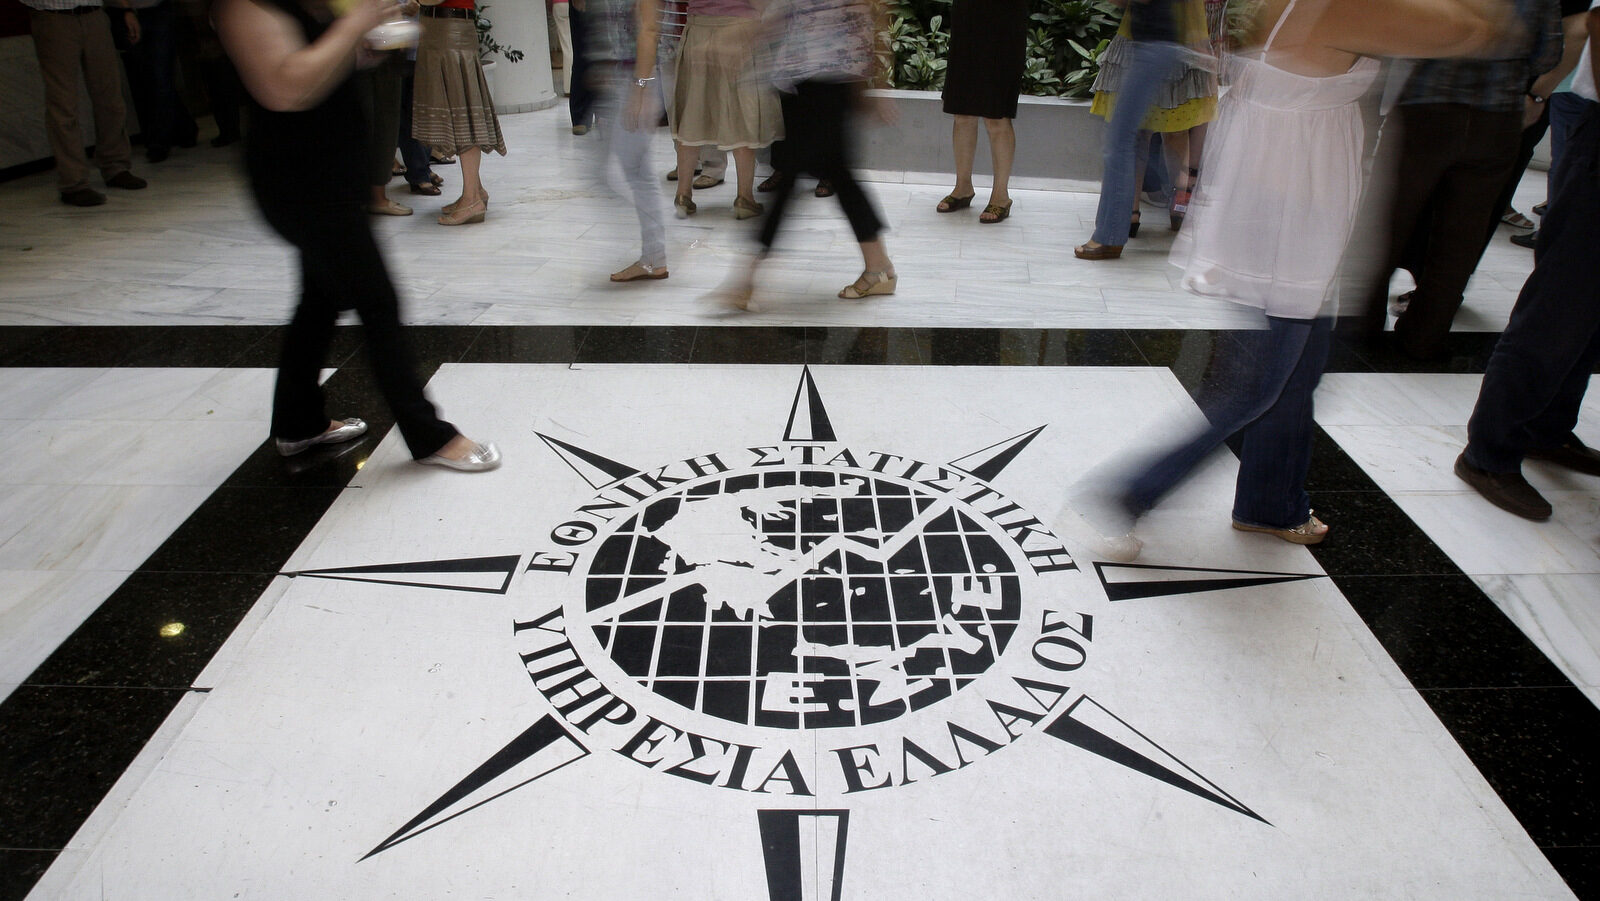 Greece's Statistics agency employees walk past the logo of the agency in Piraeus, near Athens. Serious errors in Greek deficit data, revealed last year, helped trigger the European government debt crisis rattled world markets and confidence in the euro. (AP/Petros Giannakouris)